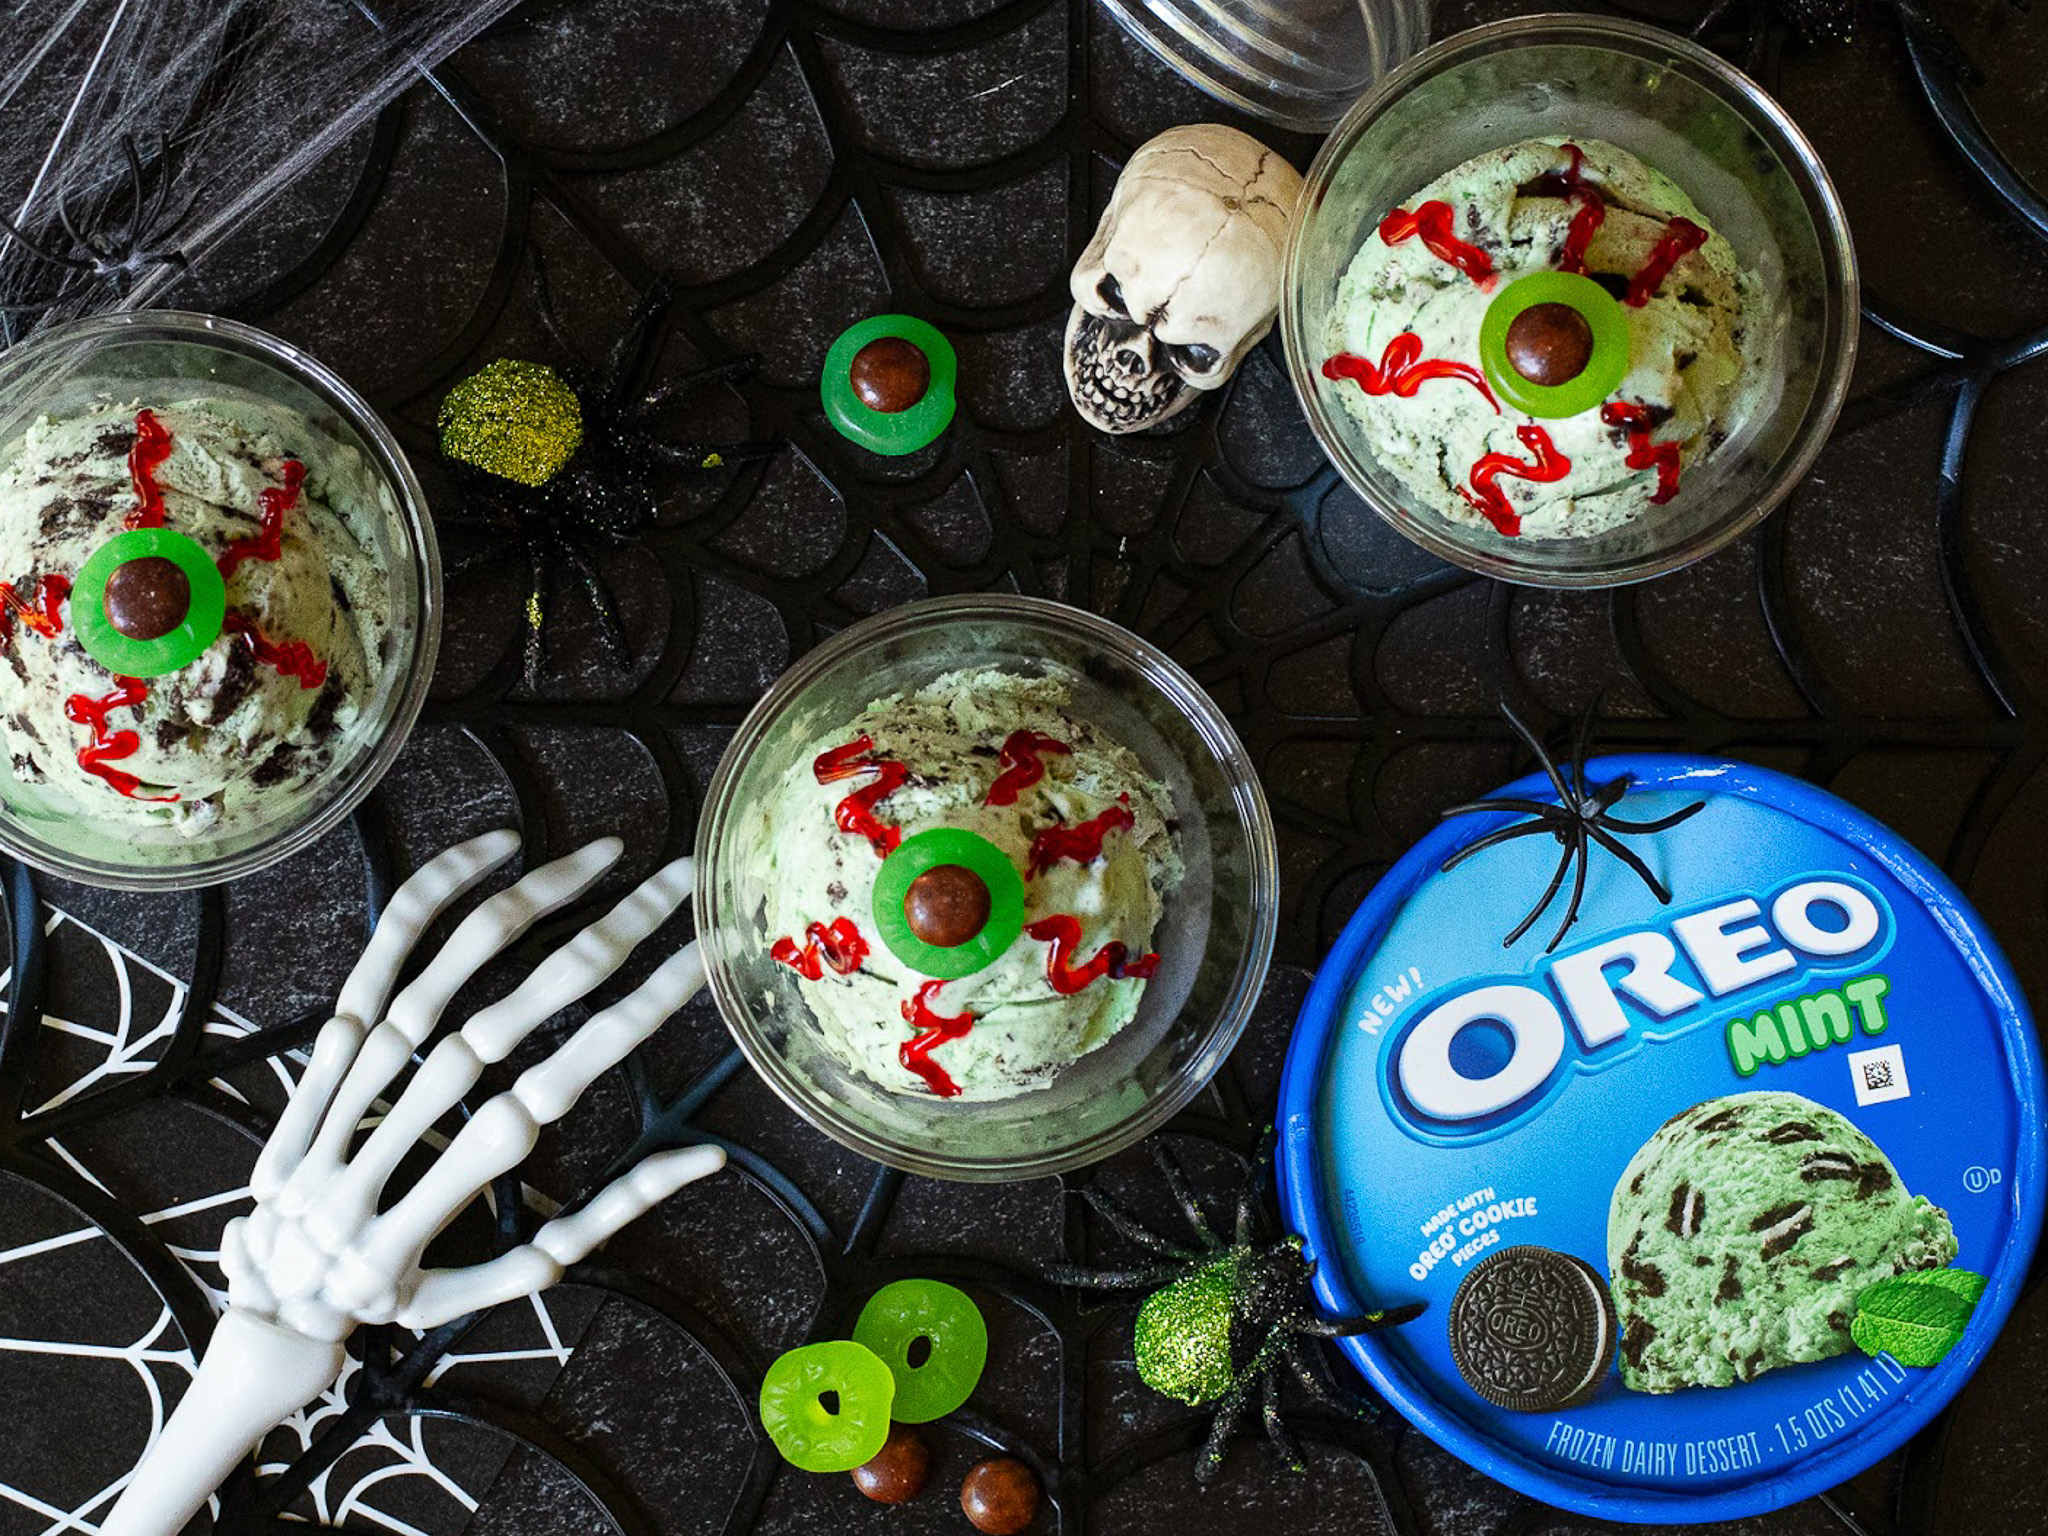 Create Tasty Holiday Treats & Save On Edy’s® Ice Cream and OREO® Frozen Dessert Flavors At Publix